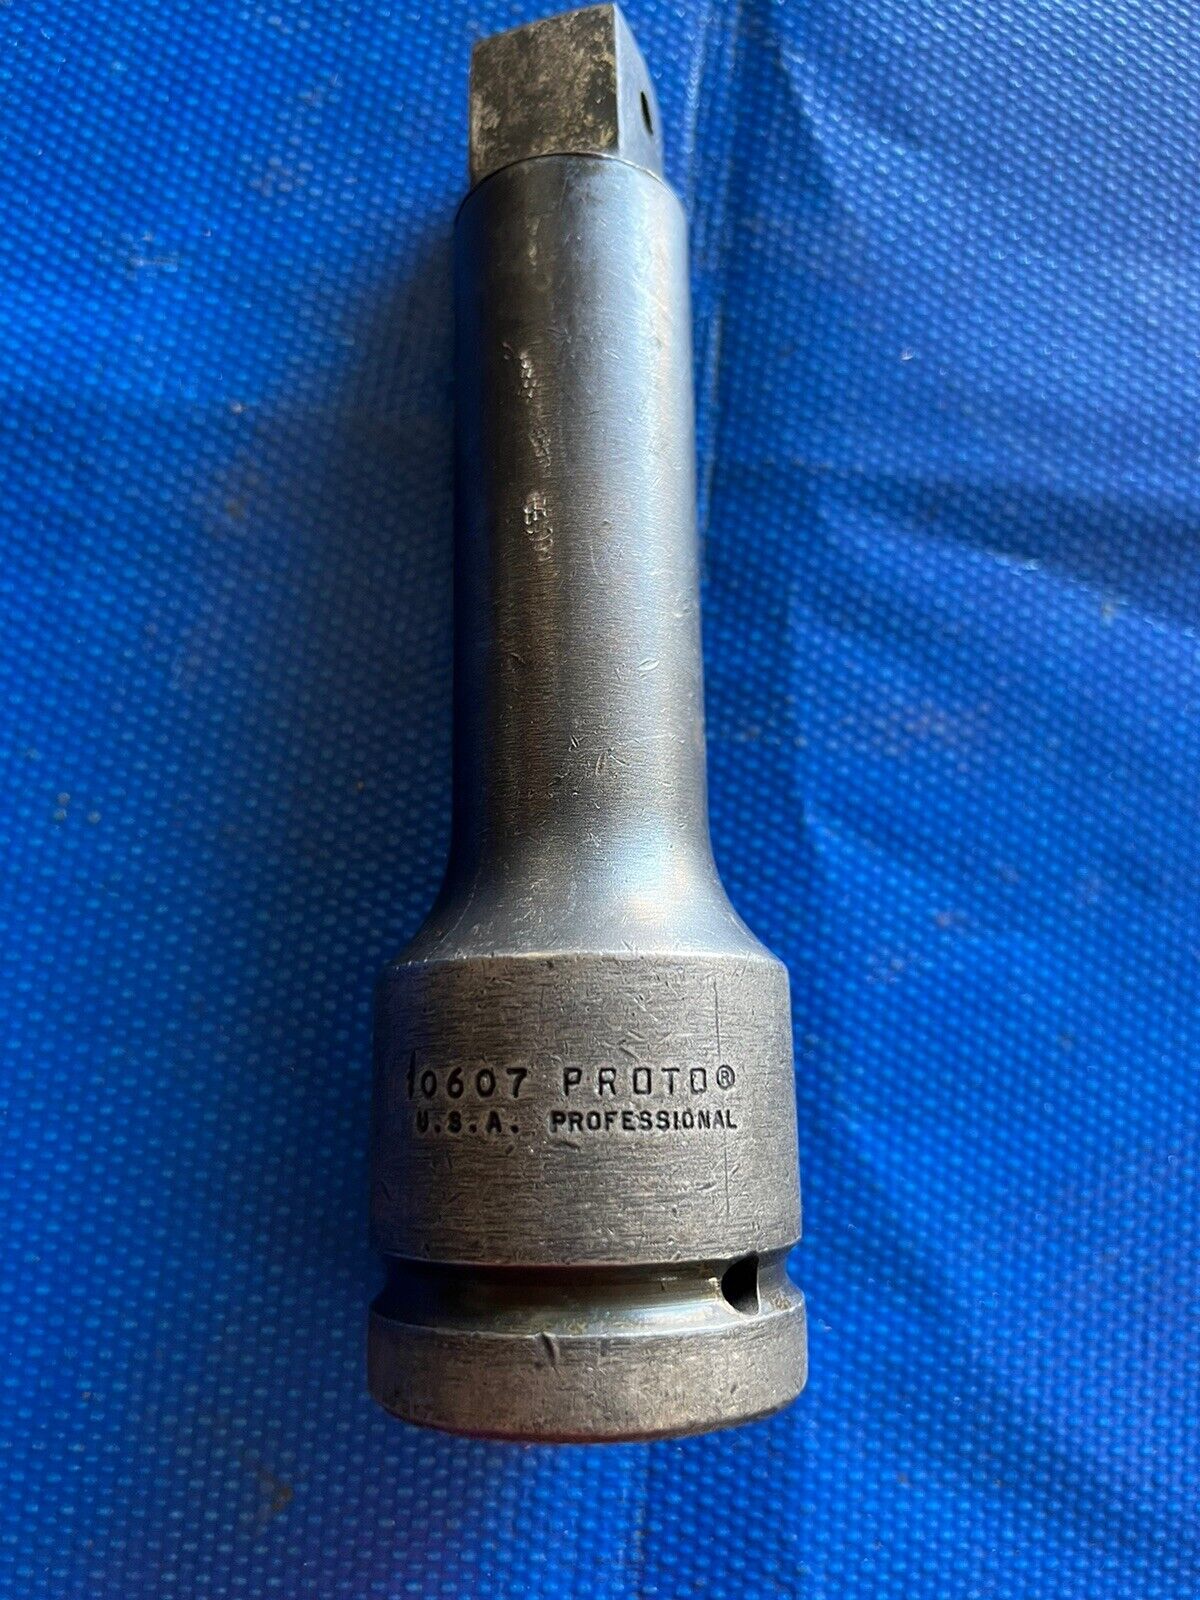 Used  Proto Impact Socket Extension 1" Drive 7-3/8" Oal 10607